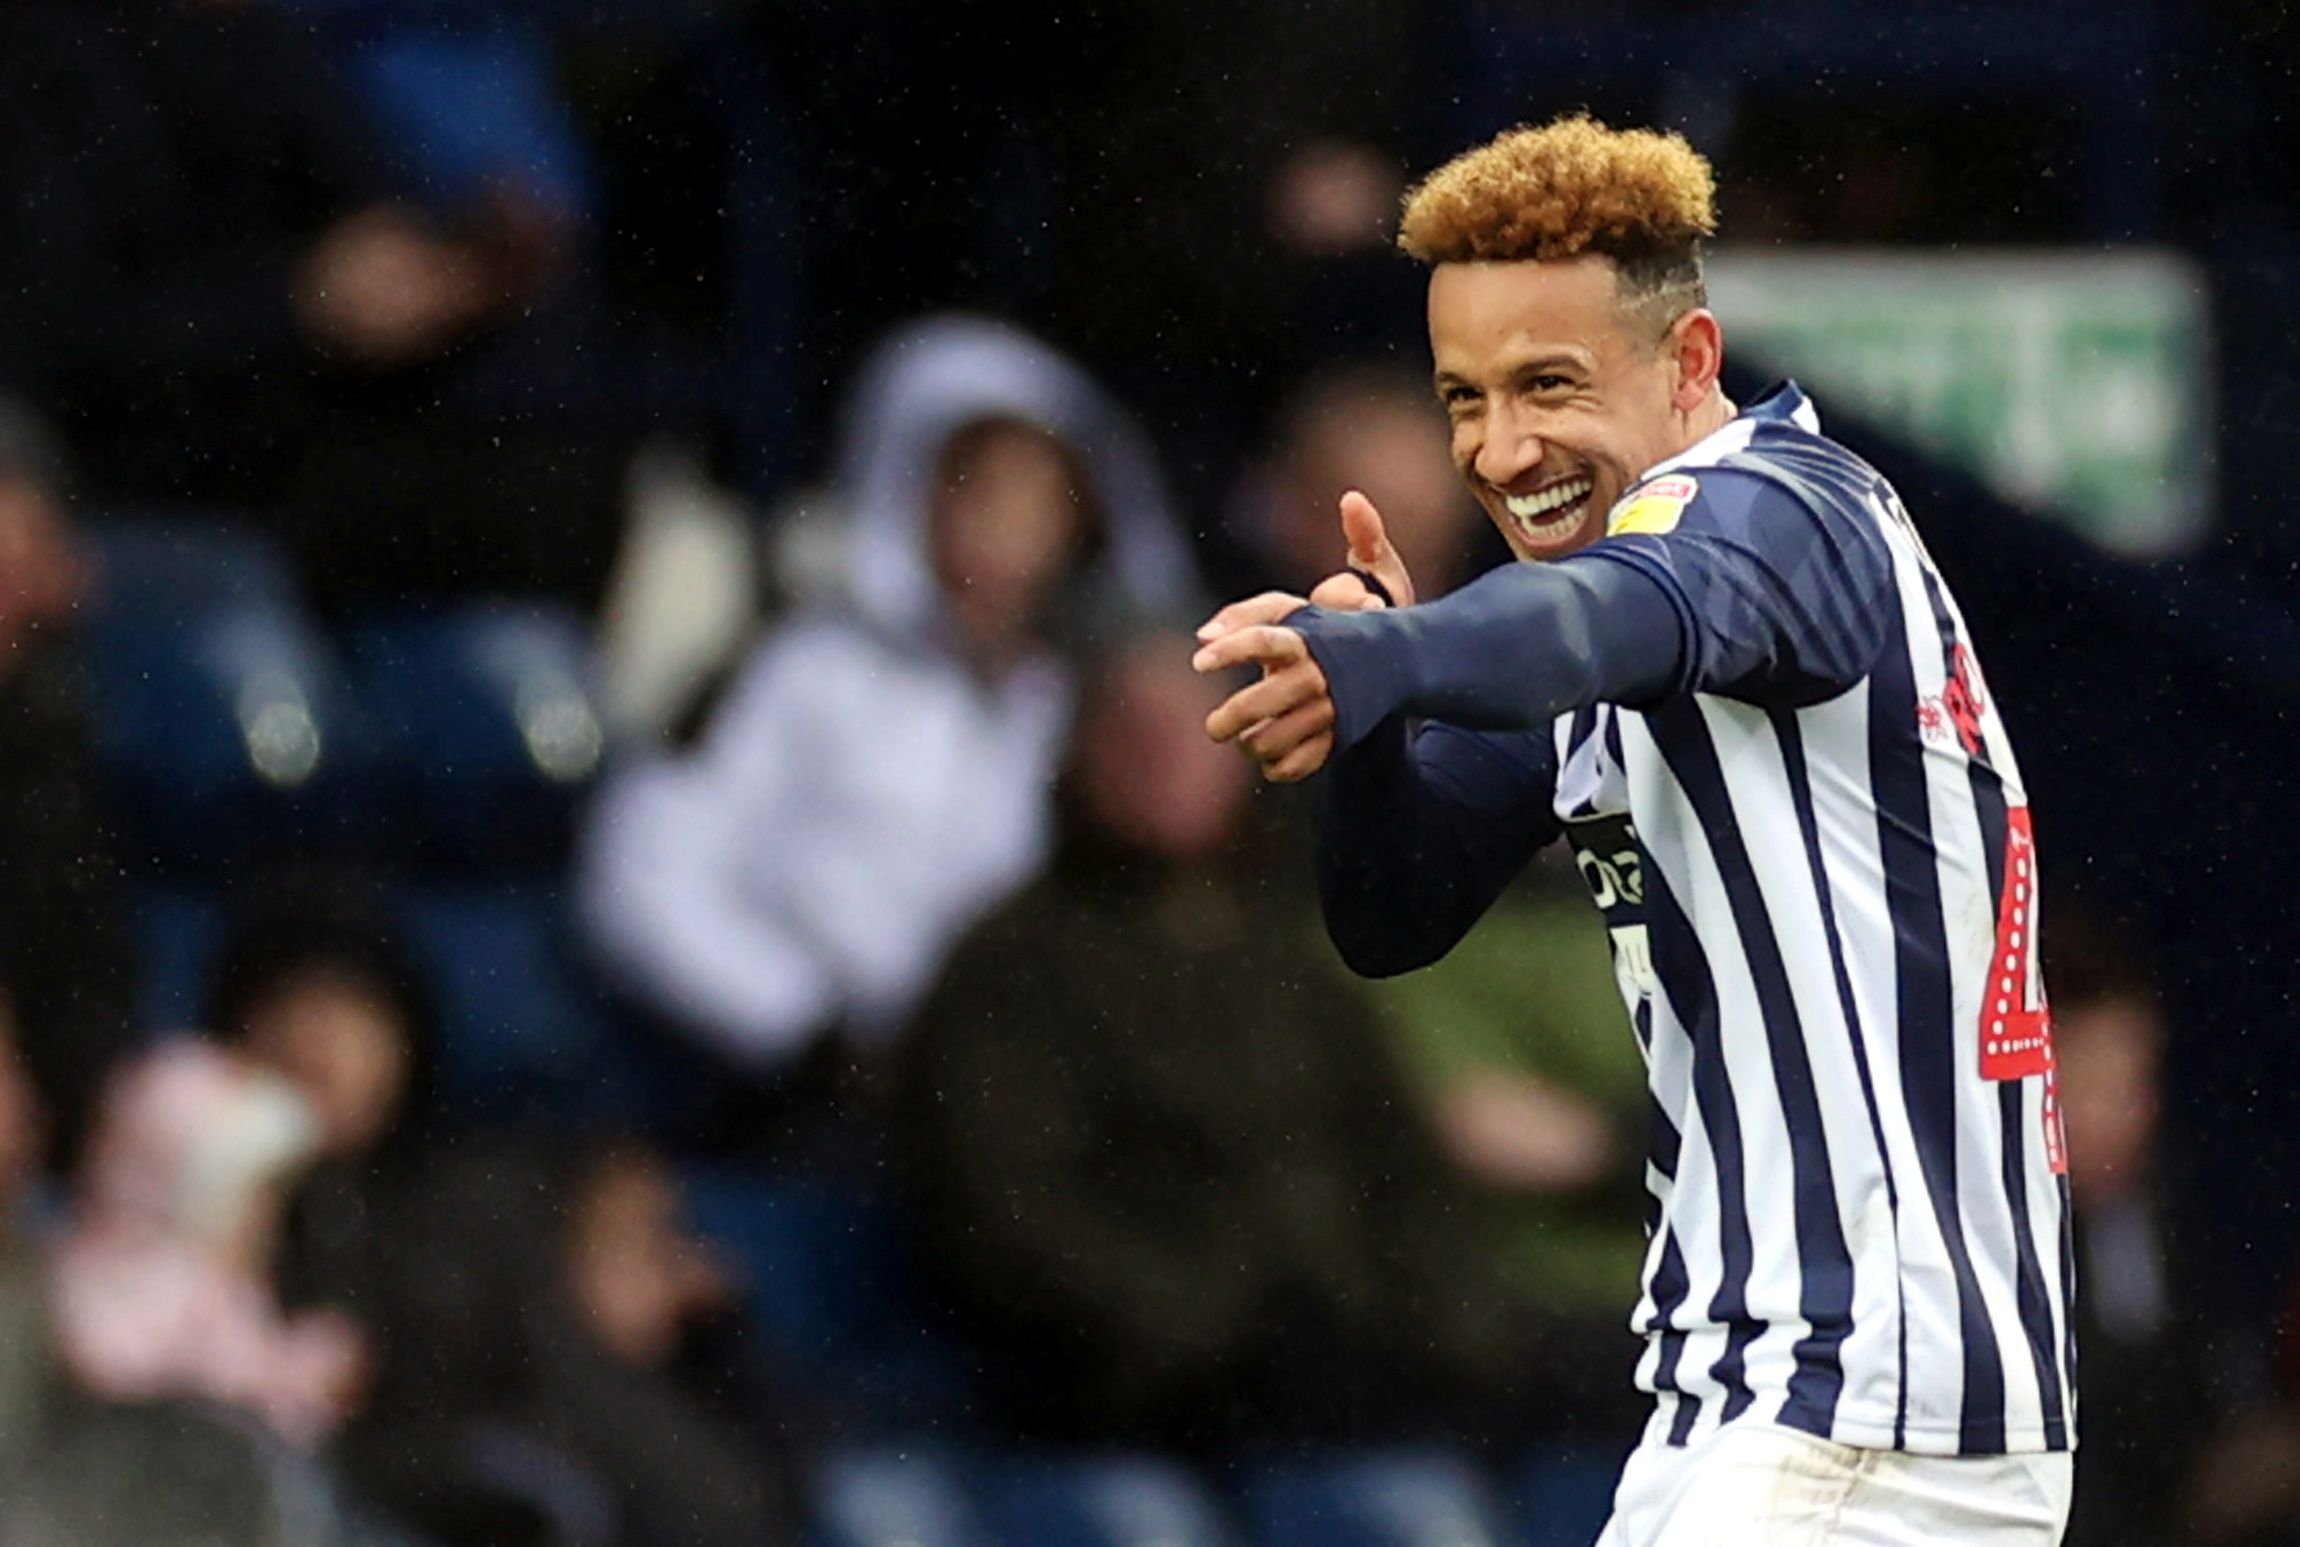 Soccer Football - Championship - West Bromwich Albion v Nottingham Forest - The Hawthorns, West Bromwich, Britain - February 15, 2020   West Bromwich Albion's Callum Robinson celebrates scoring their first goal    Action Images/Carl Recine    EDITORIAL USE ONLY. No use with unauthorized audio, video, data, fixture lists, club/league logos or 